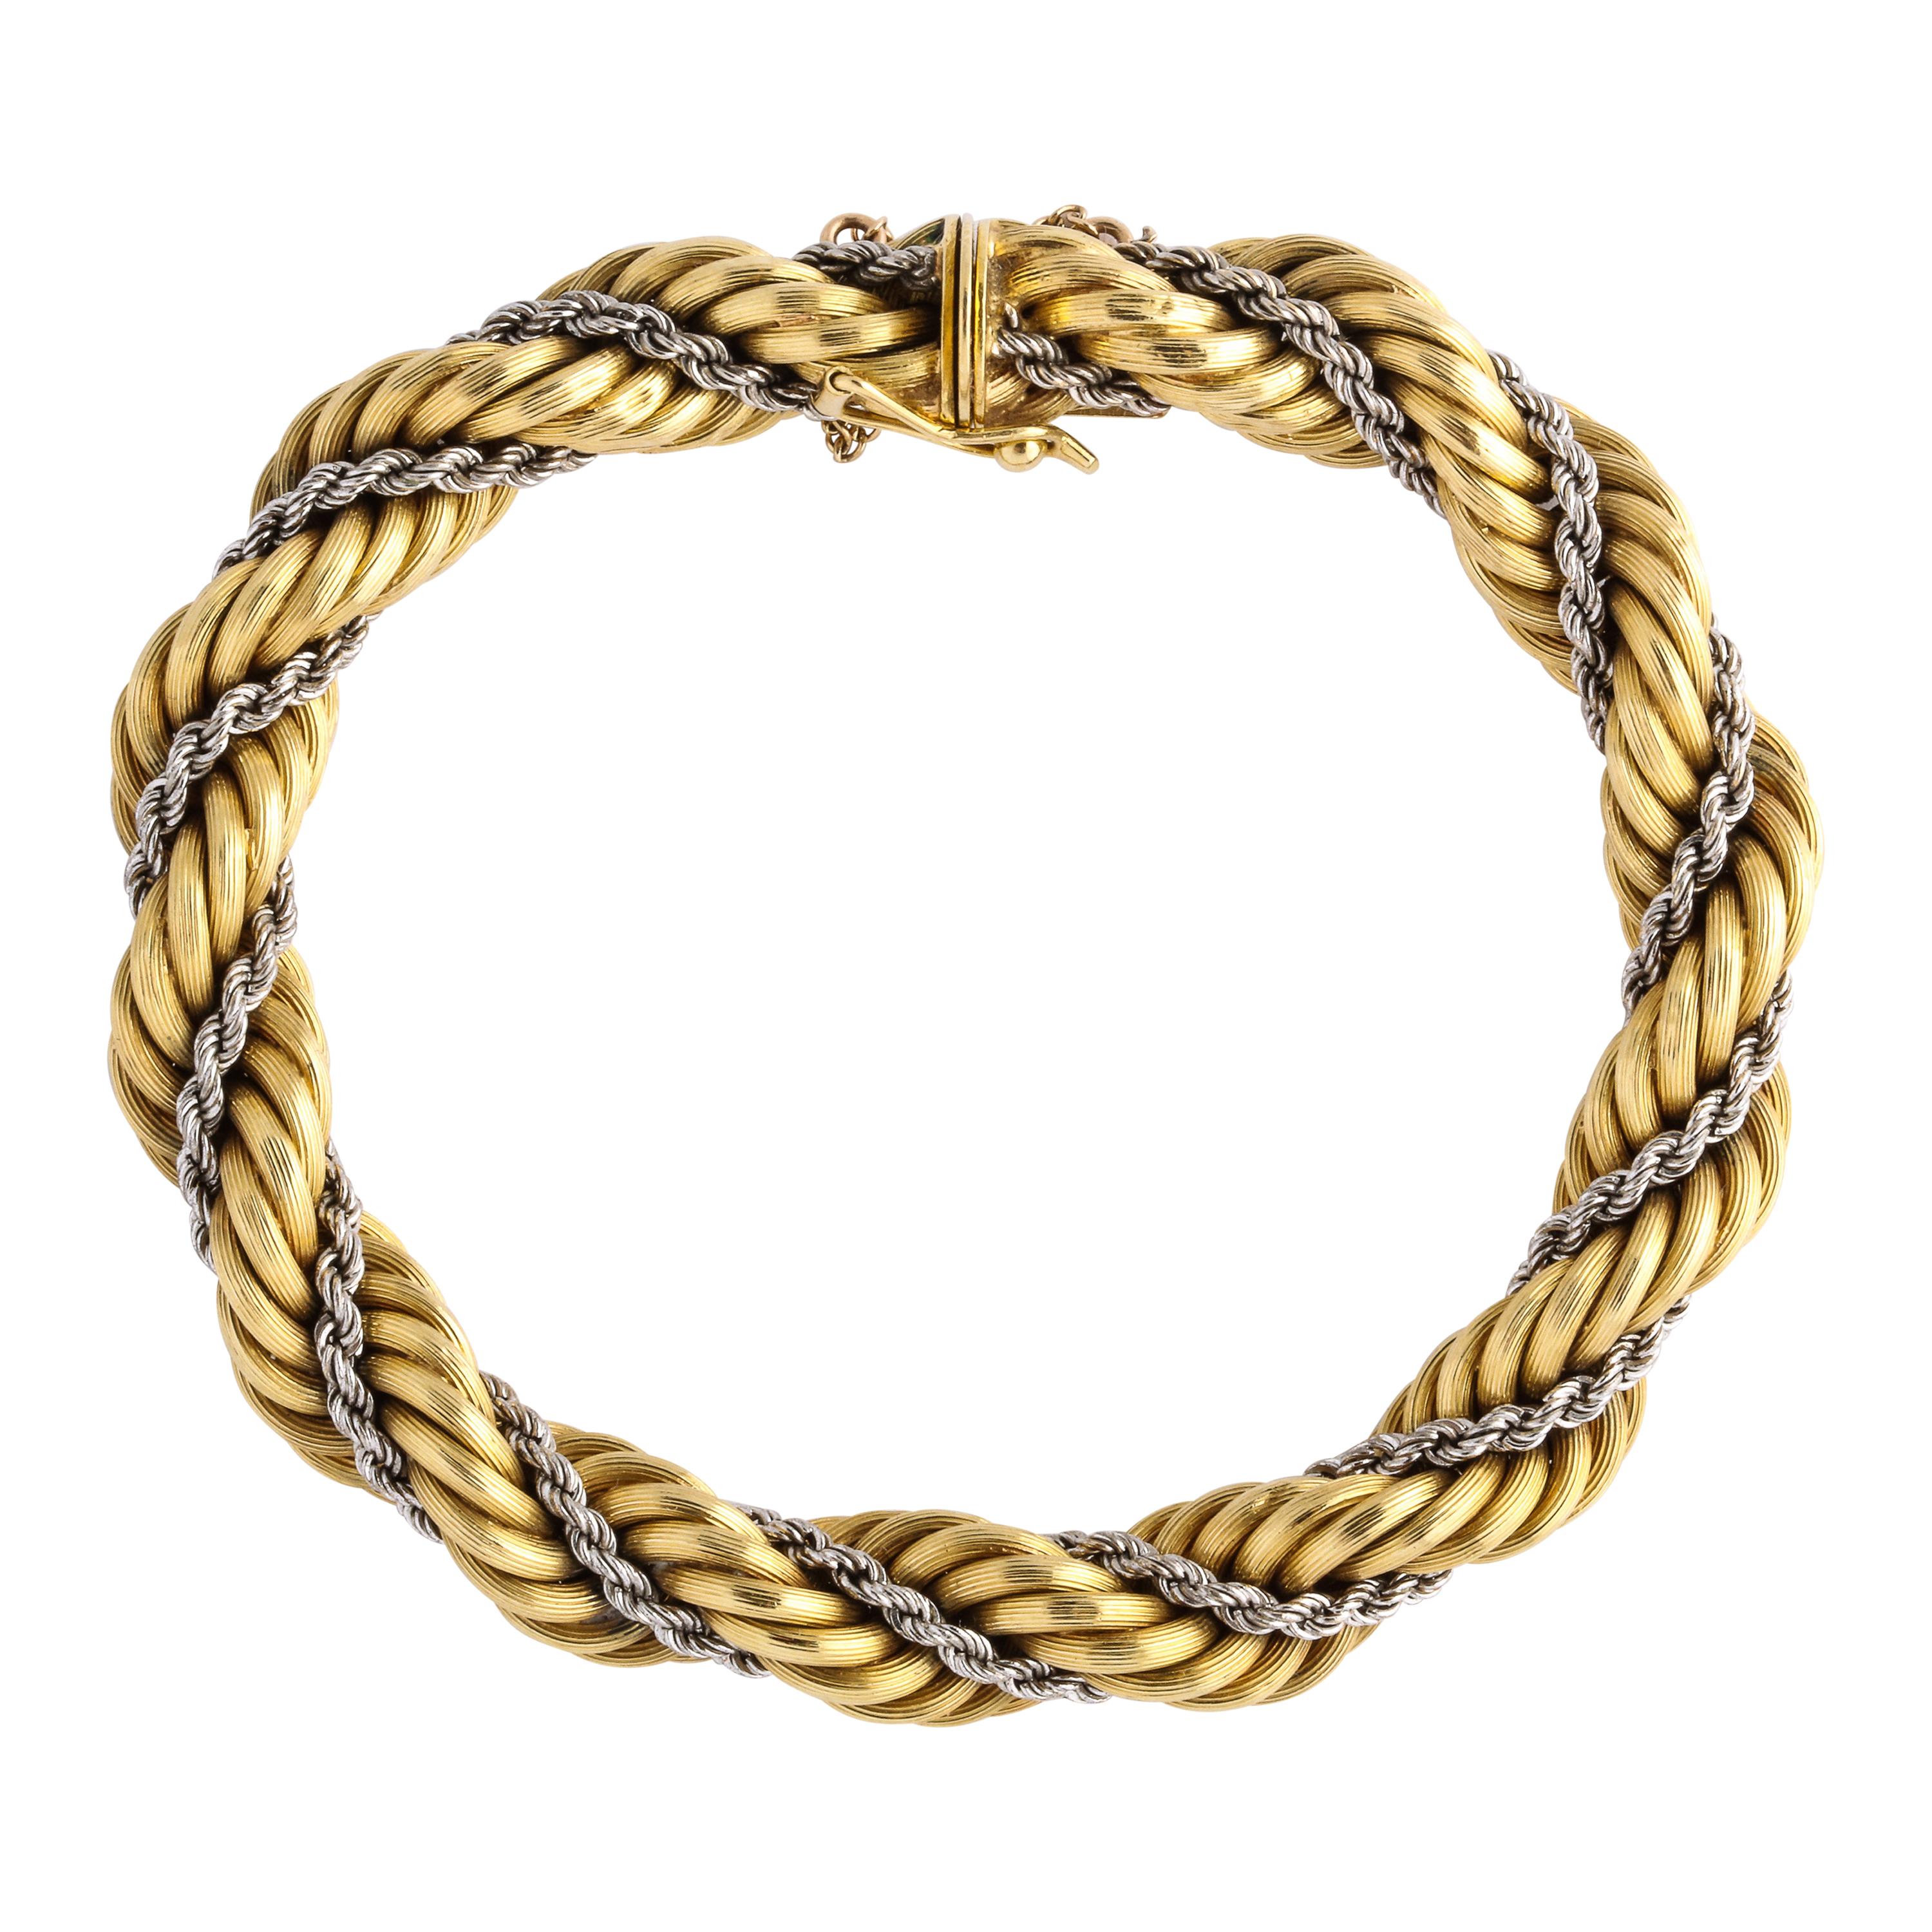  1960s Cartier Two-Tone Gold Rope Twist Chain Bracelet with Box